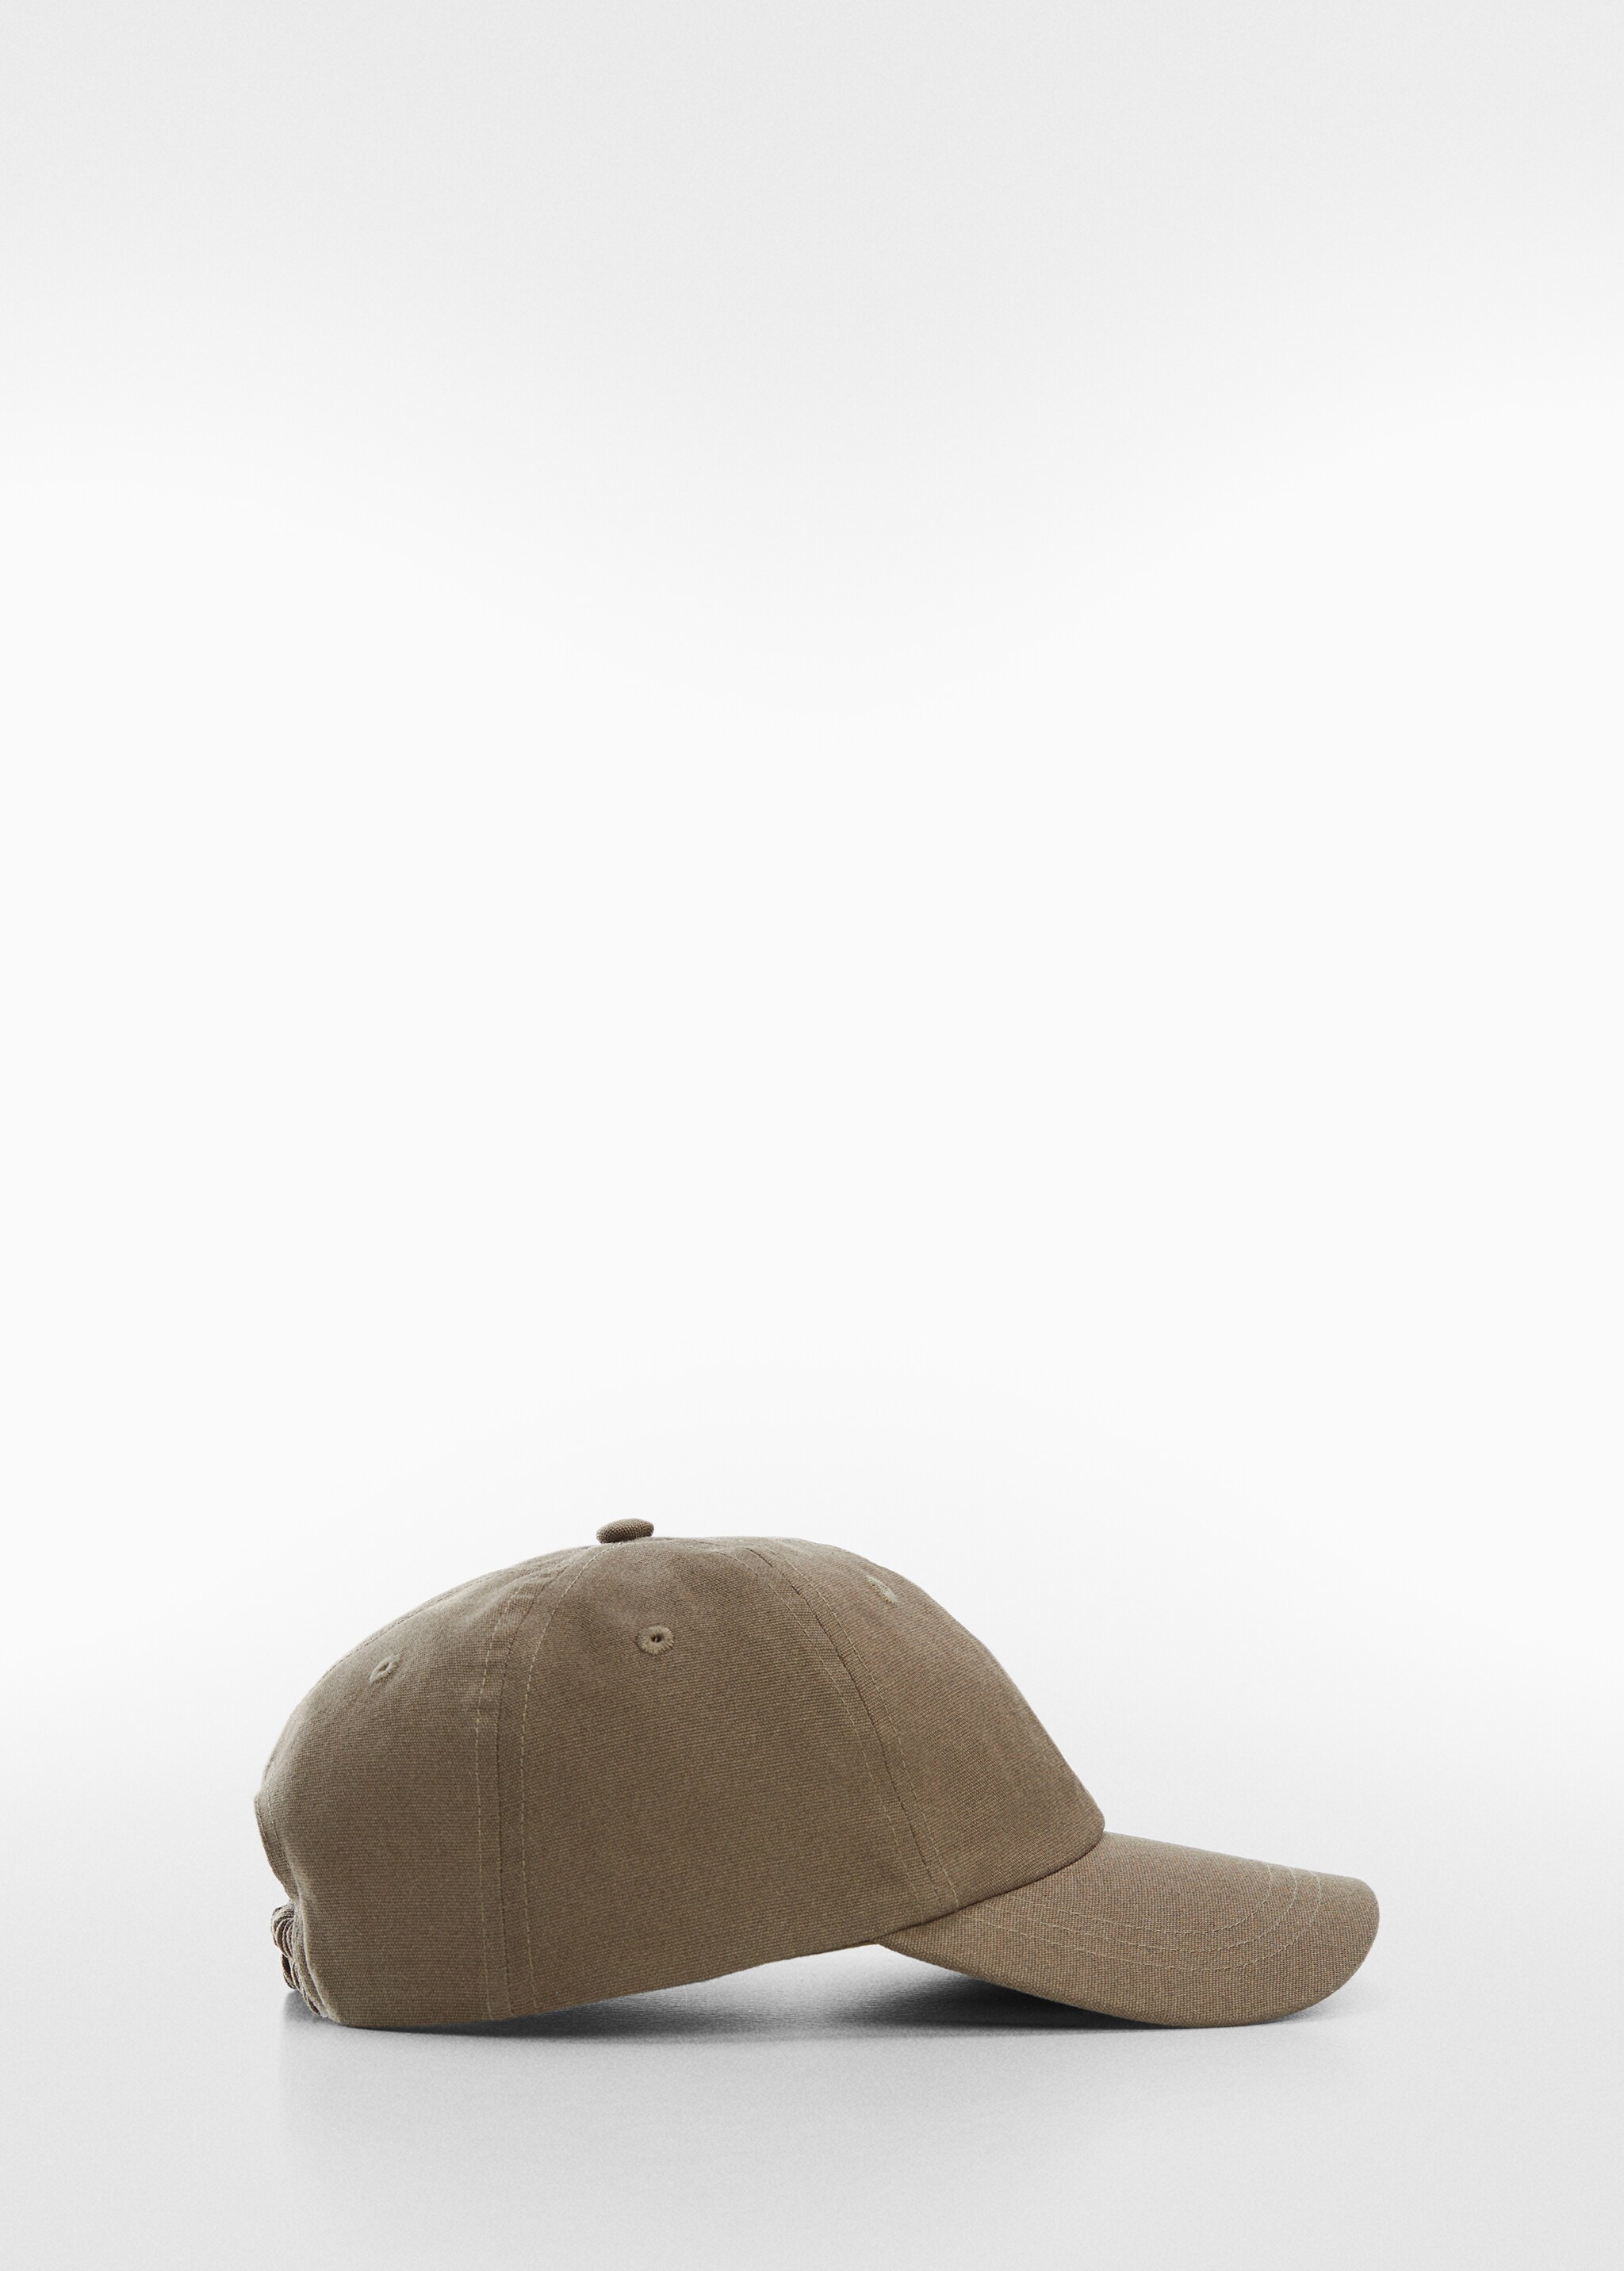 Organic cotton cap - Article without model